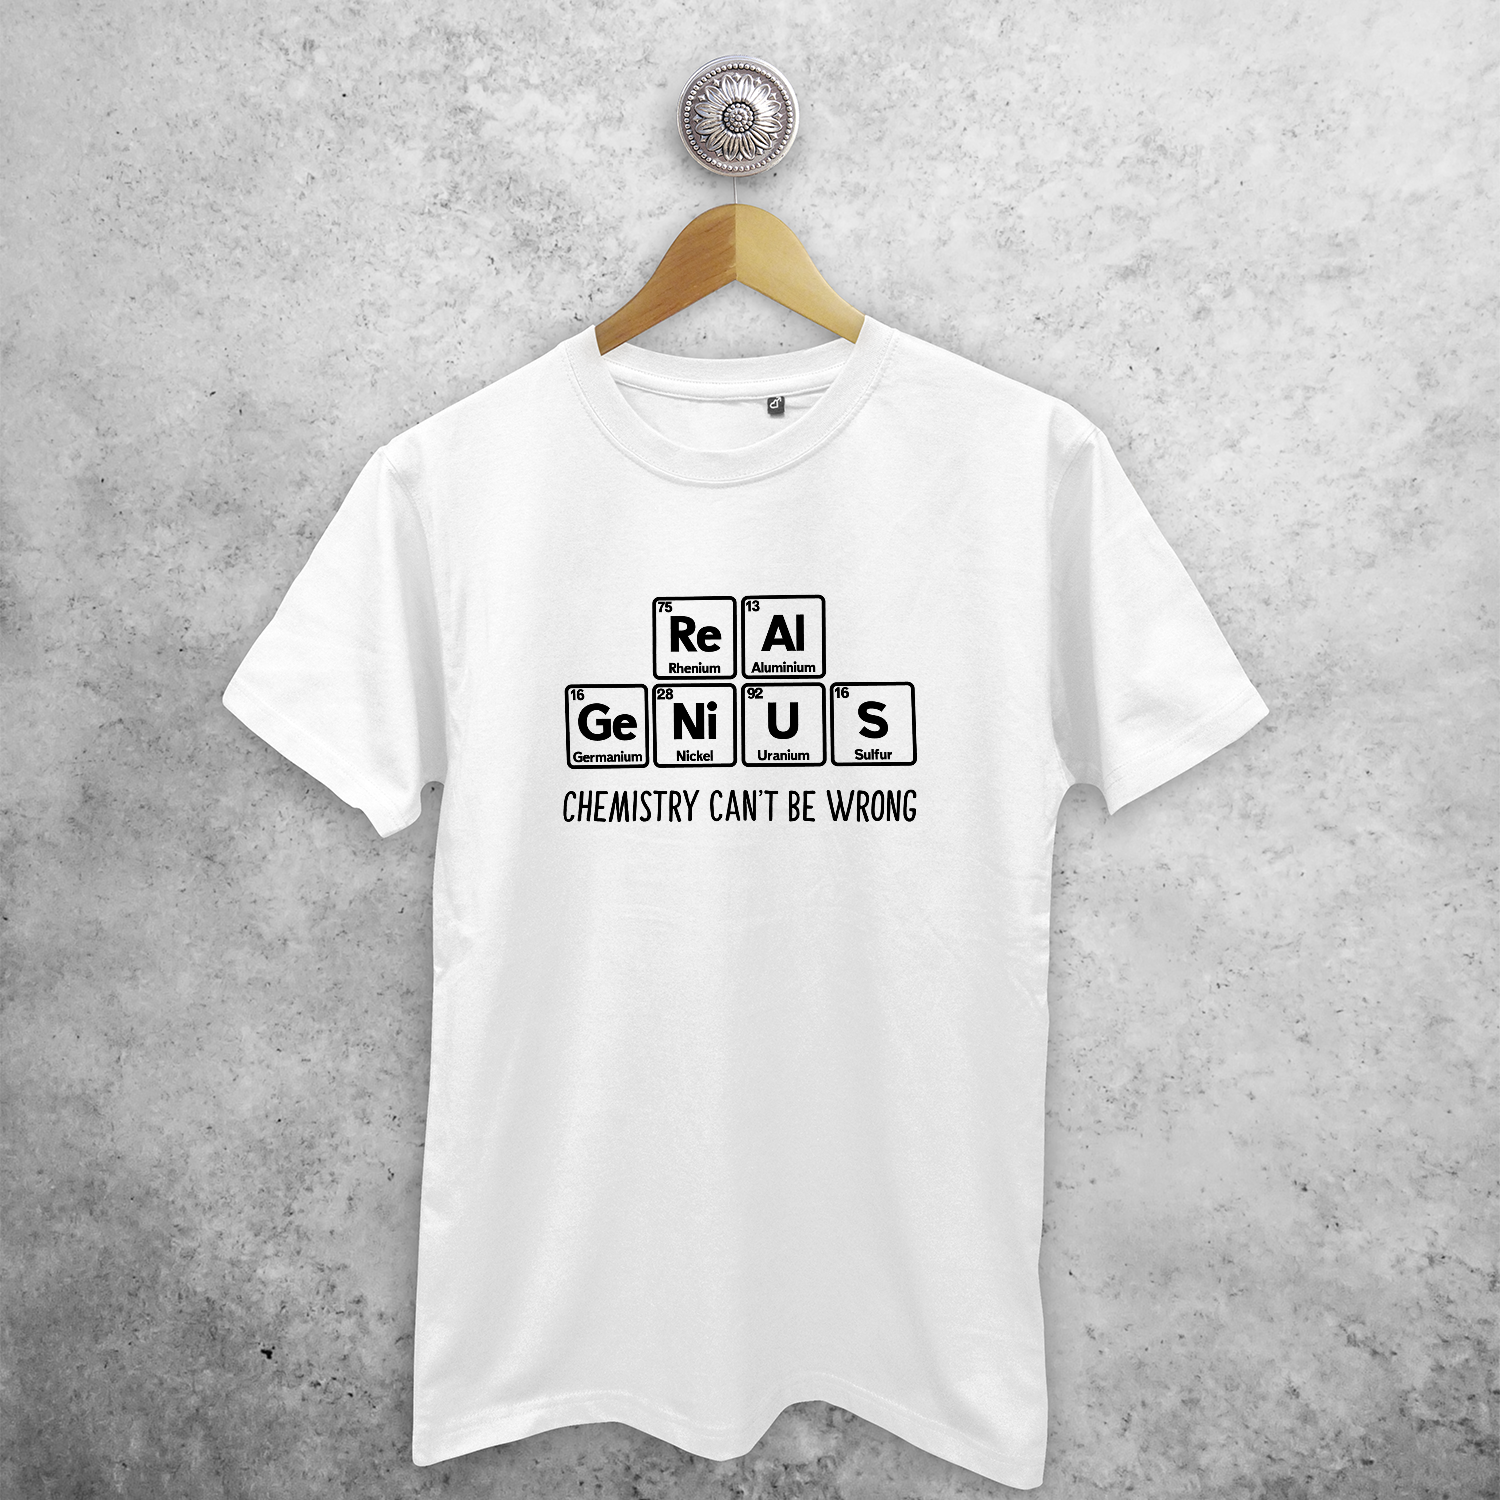 Real genius - Chemistry can't be wrong' volwassene shirt